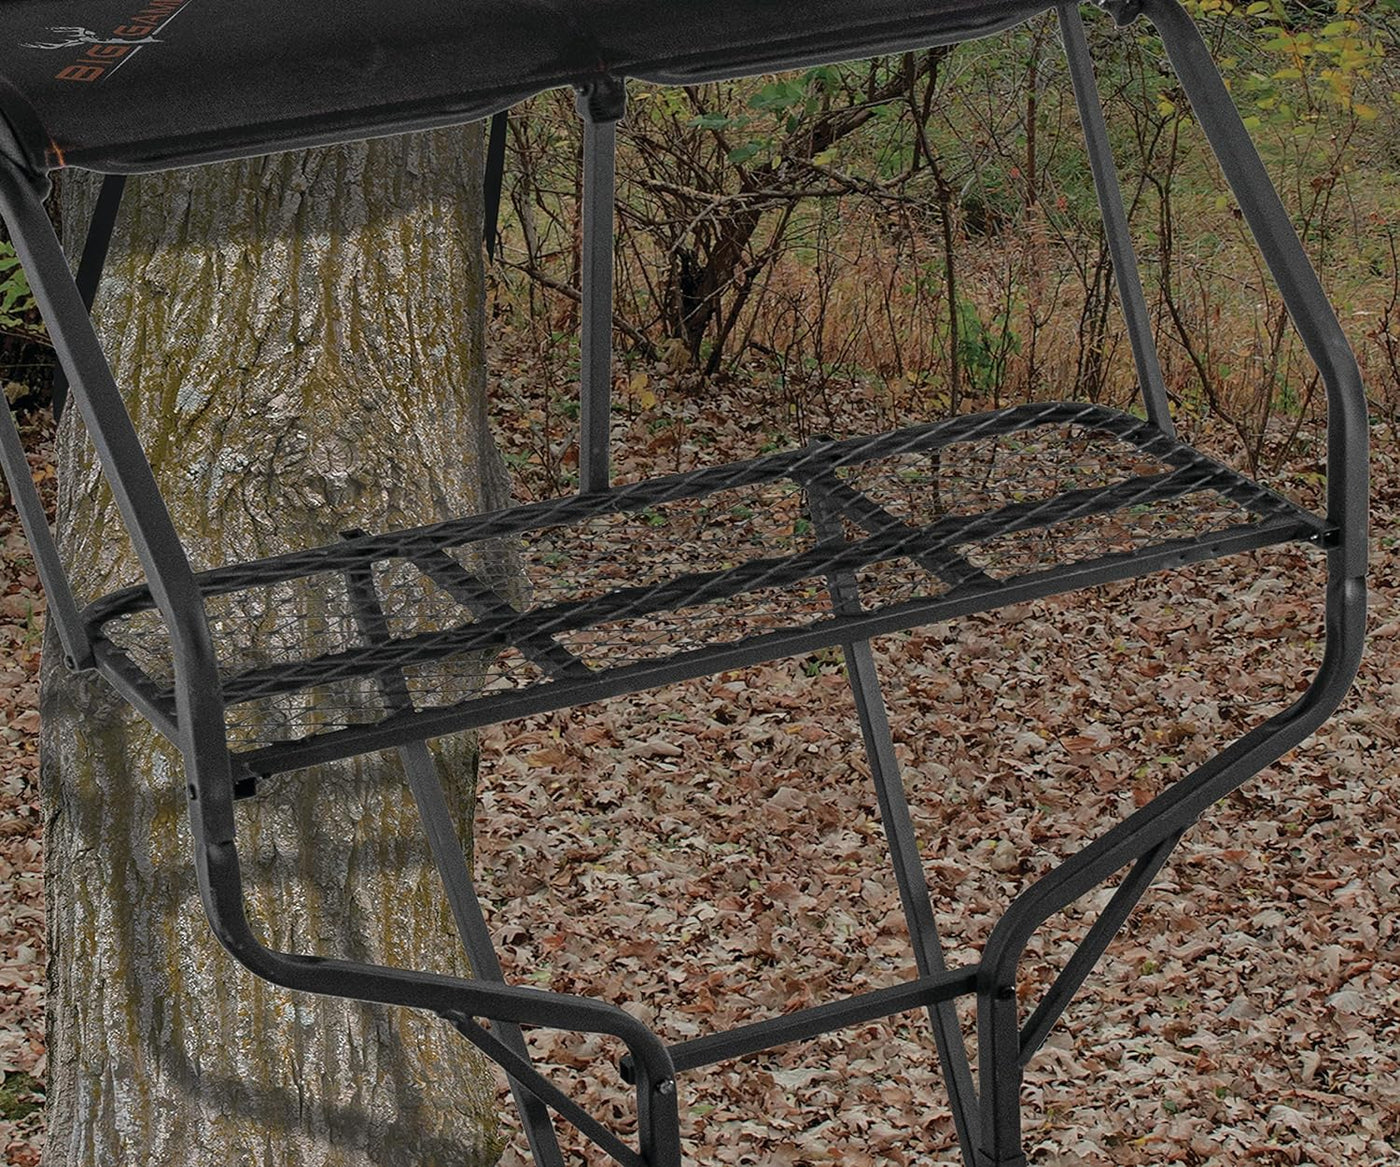 Muddy Legend XLT 2 Man Tree Stand 18 FT. - 500 lb. Rated - 2 Four Point Harnesses - $125